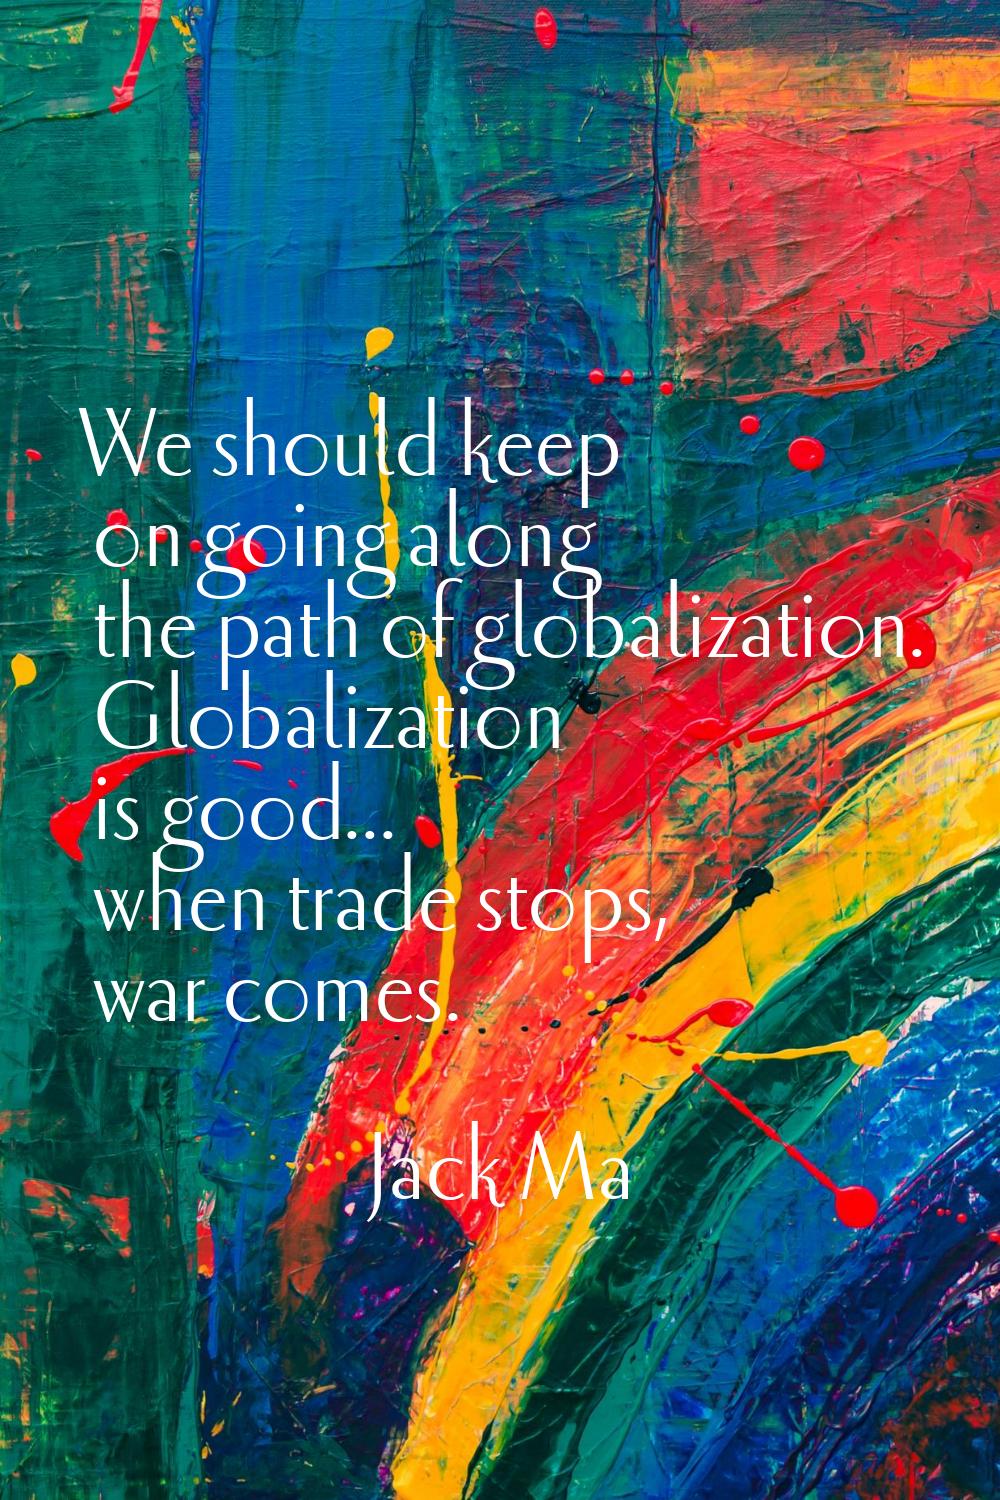 We should keep on going along the path of globalization. Globalization is good... when trade stops,